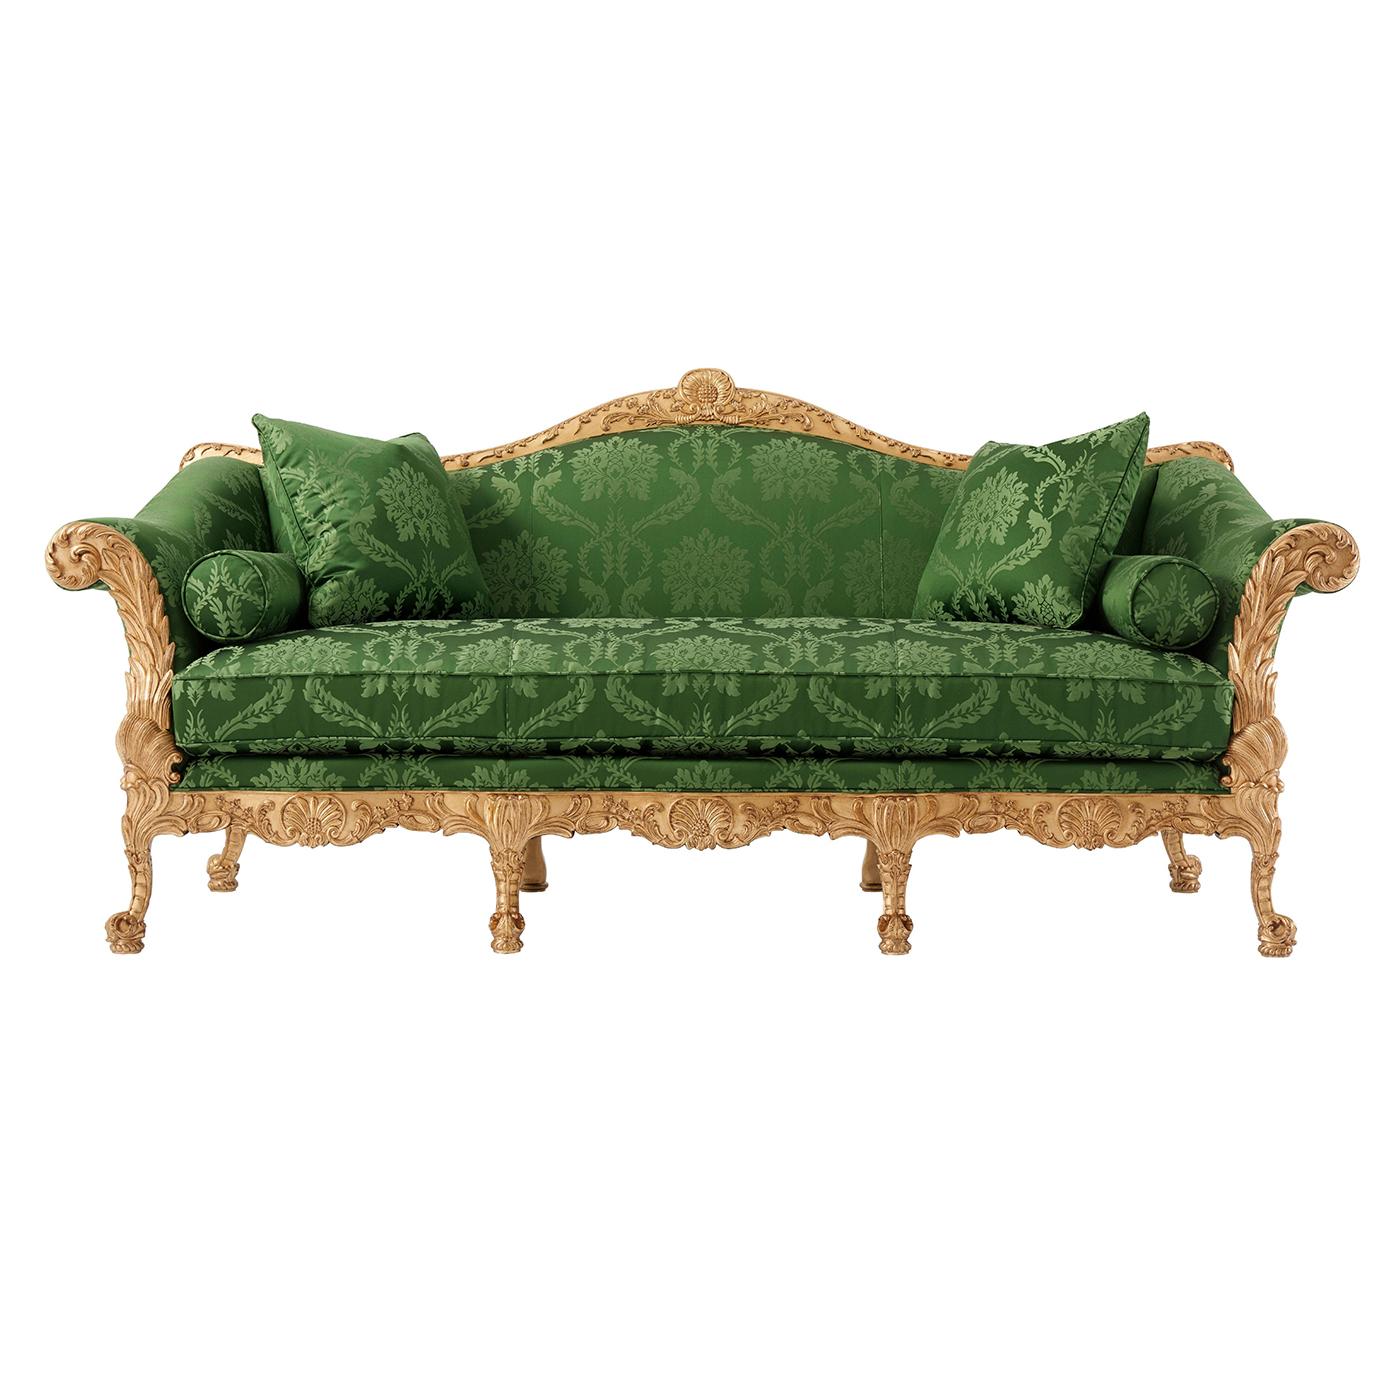 An elaborate George II style hand carved mahogany and gilt sofa, the arched top rail above a tight back and down swept arms, the bench seat with two bolster cushions and two throw pillows, with palm-leaf carved out swept arms and rails above